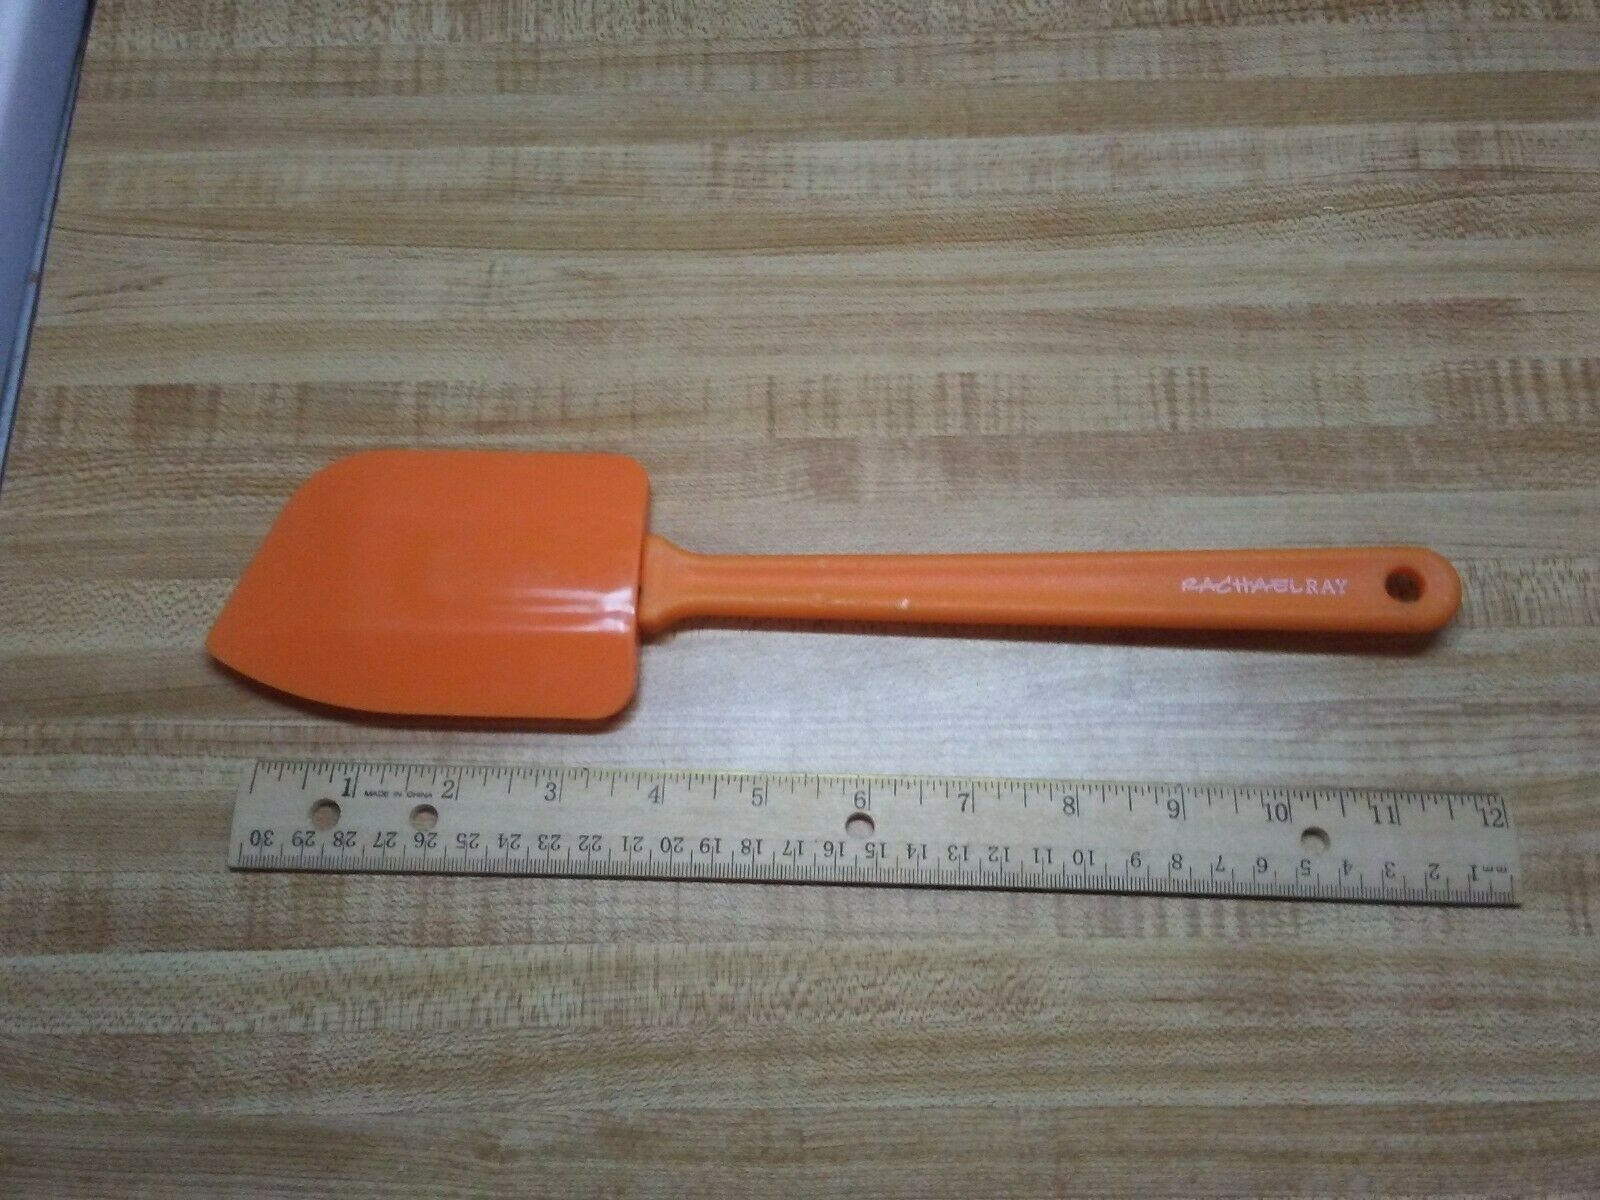 Rachael Ray pointed rubber spatula - $17.09